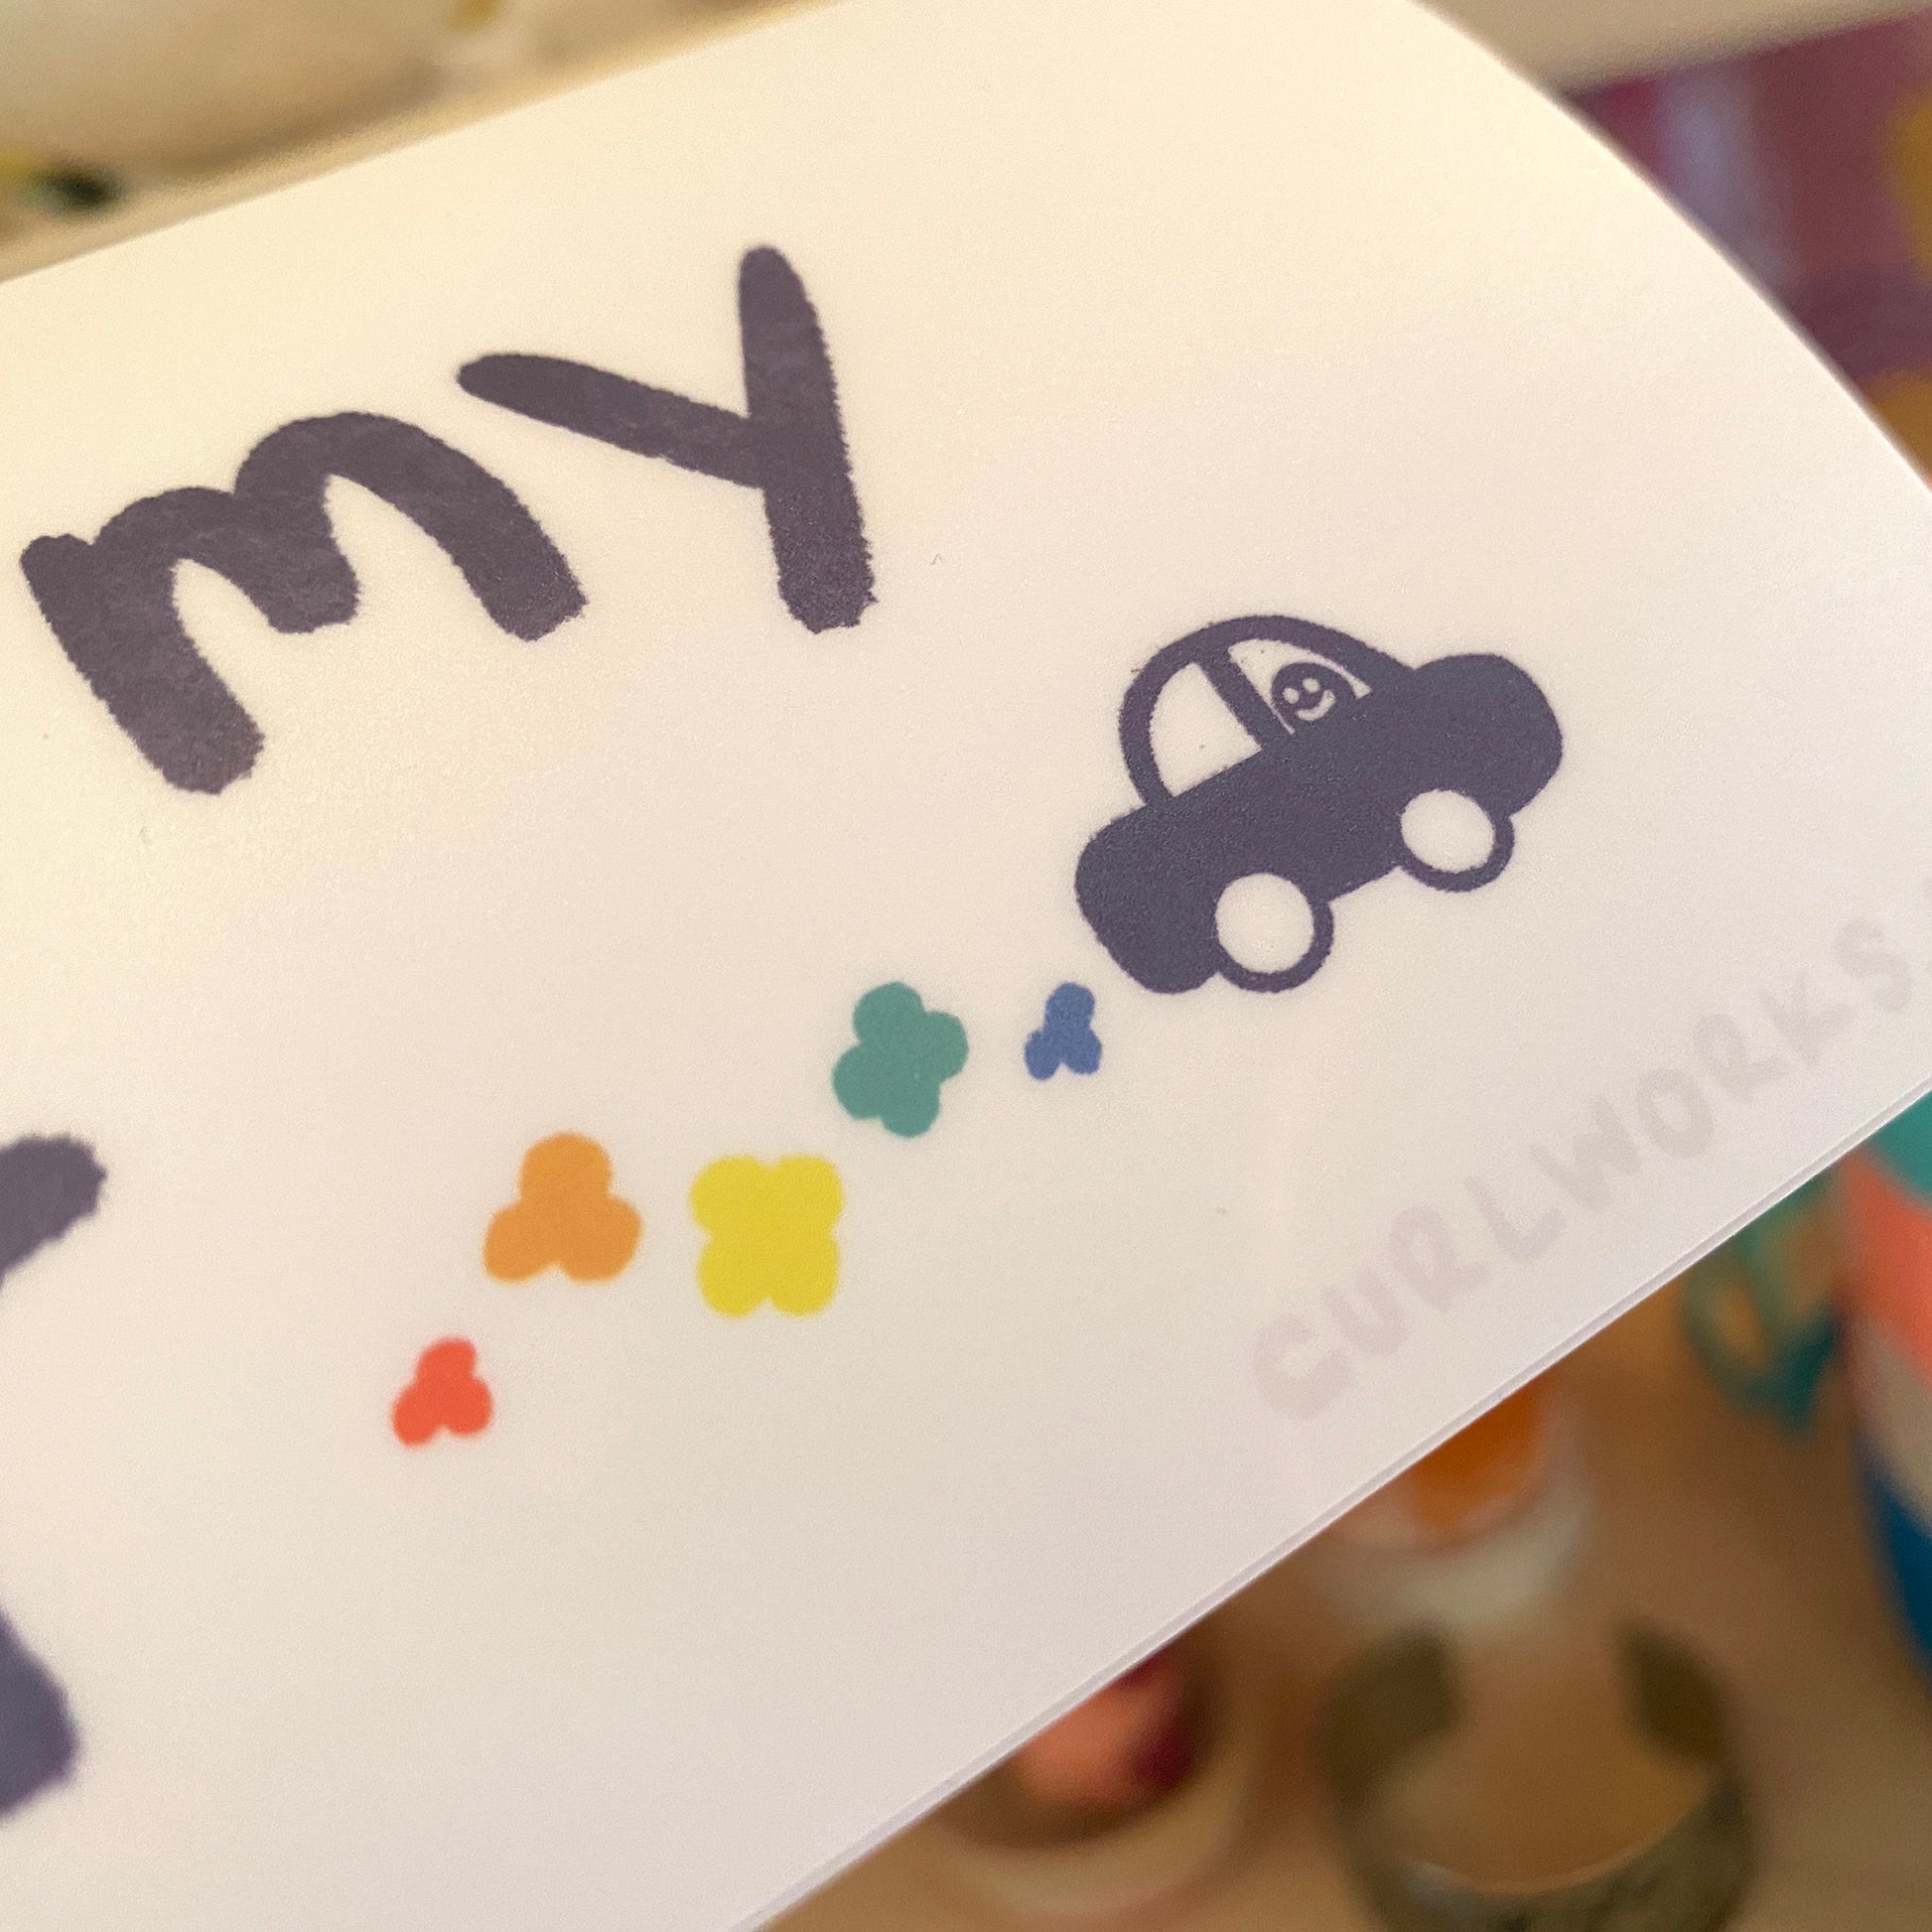 A closeup of the tiny car which shows a small figure with a smiley face driving along with rainbow exhaust trailing out of the car.